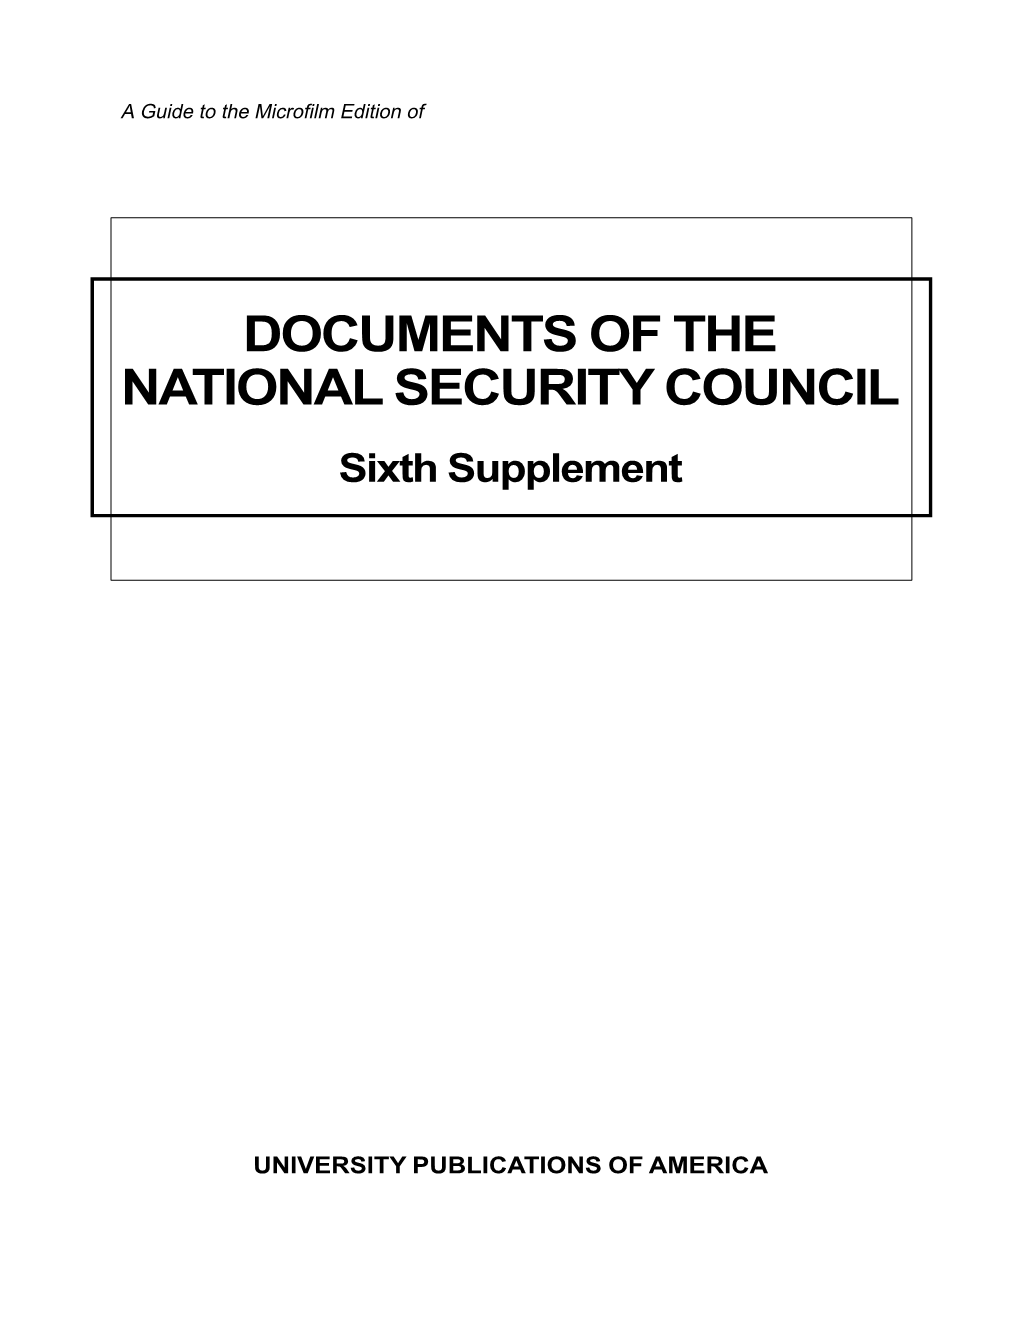 DOCUMENTS of the NATIONAL SECURITY COUNCIL Sixth Supplement